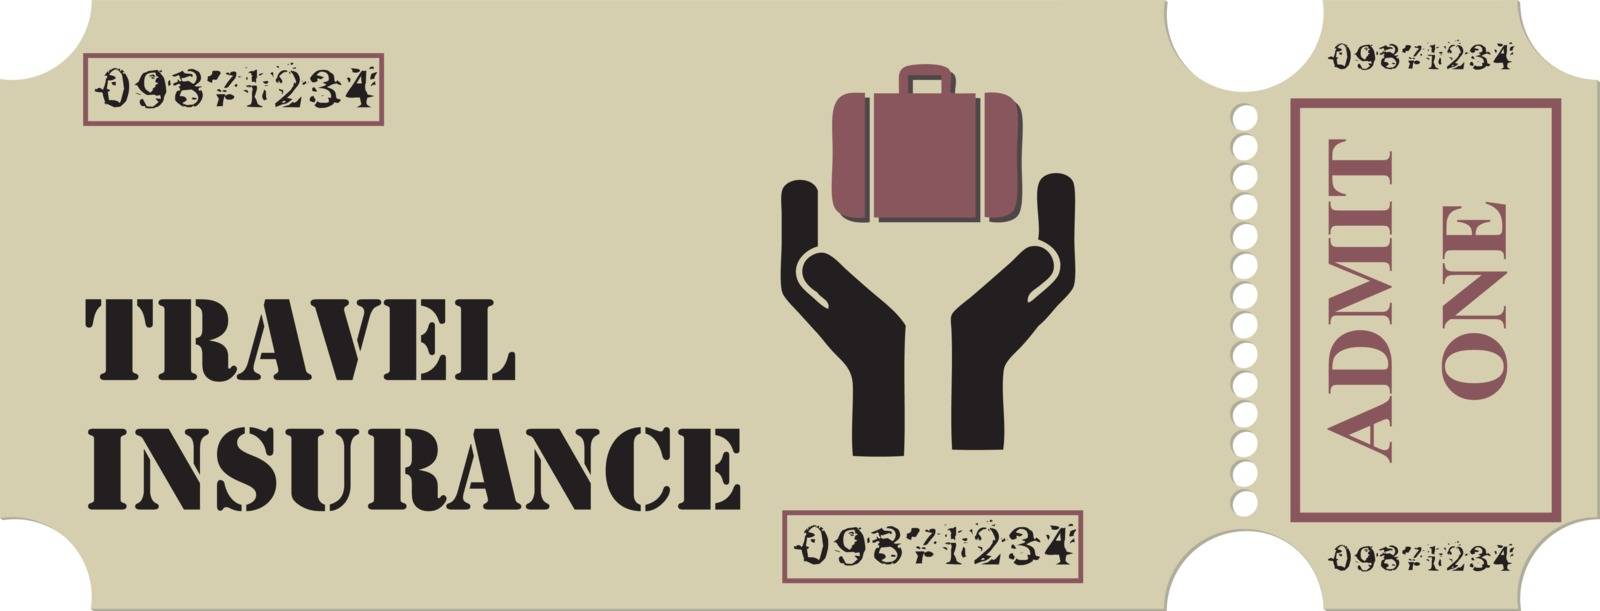 Ticket for travel insurance with a baggage security symbol